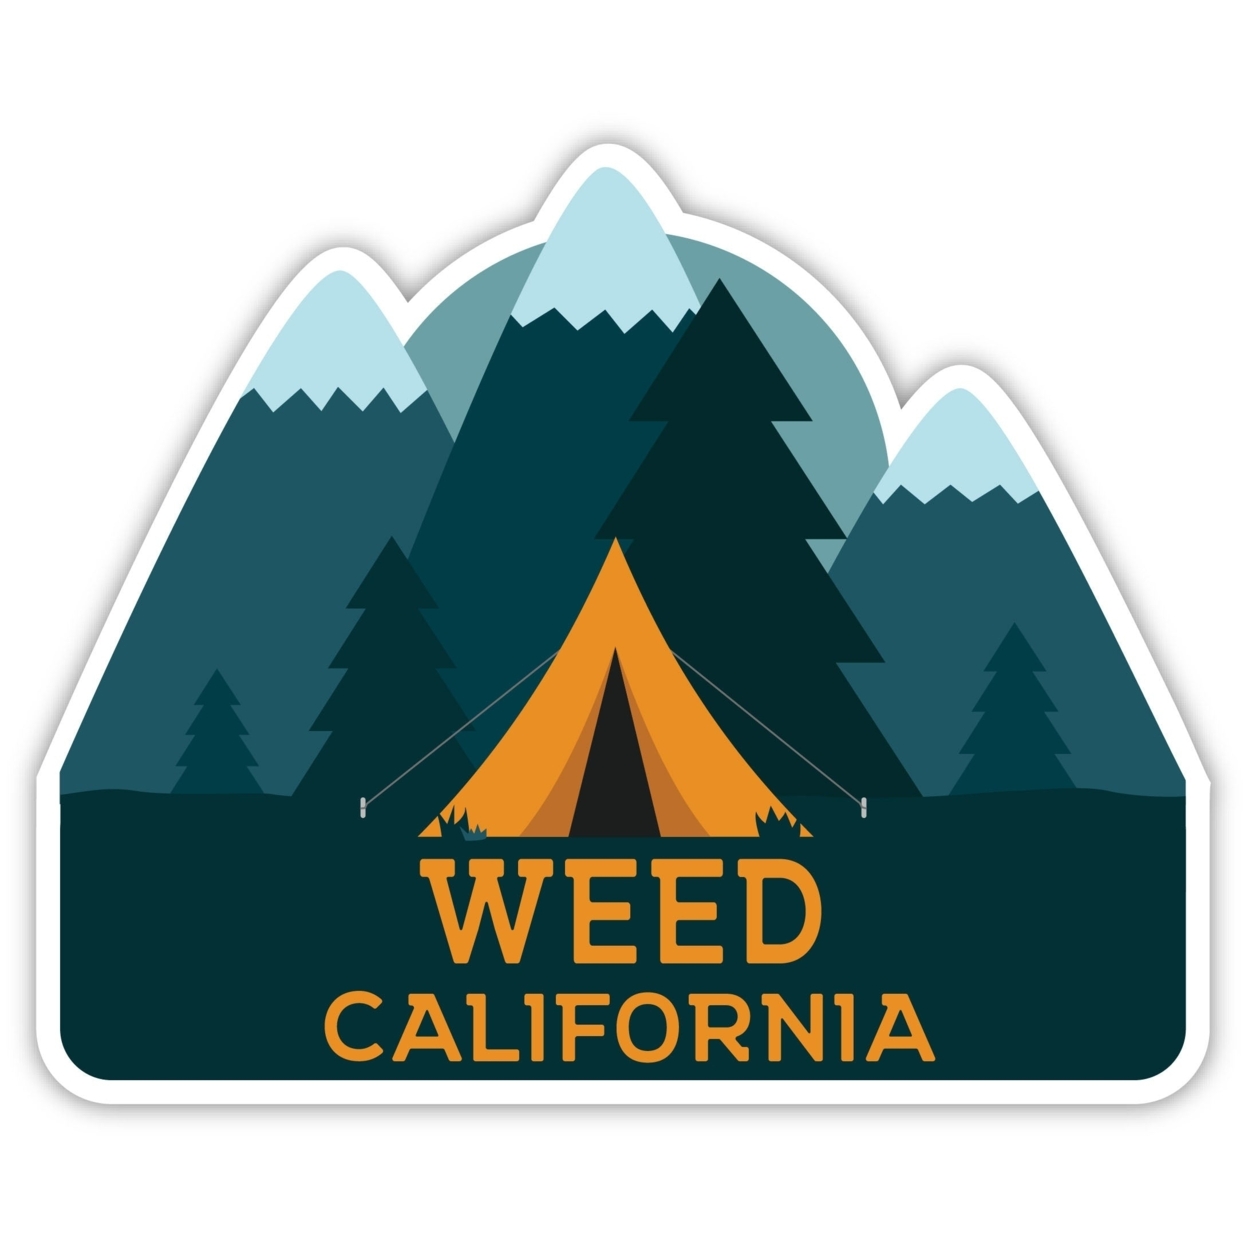 Weed California Souvenir Decorative Stickers (Choose Theme And Size) - Single Unit, 4-Inch, Tent